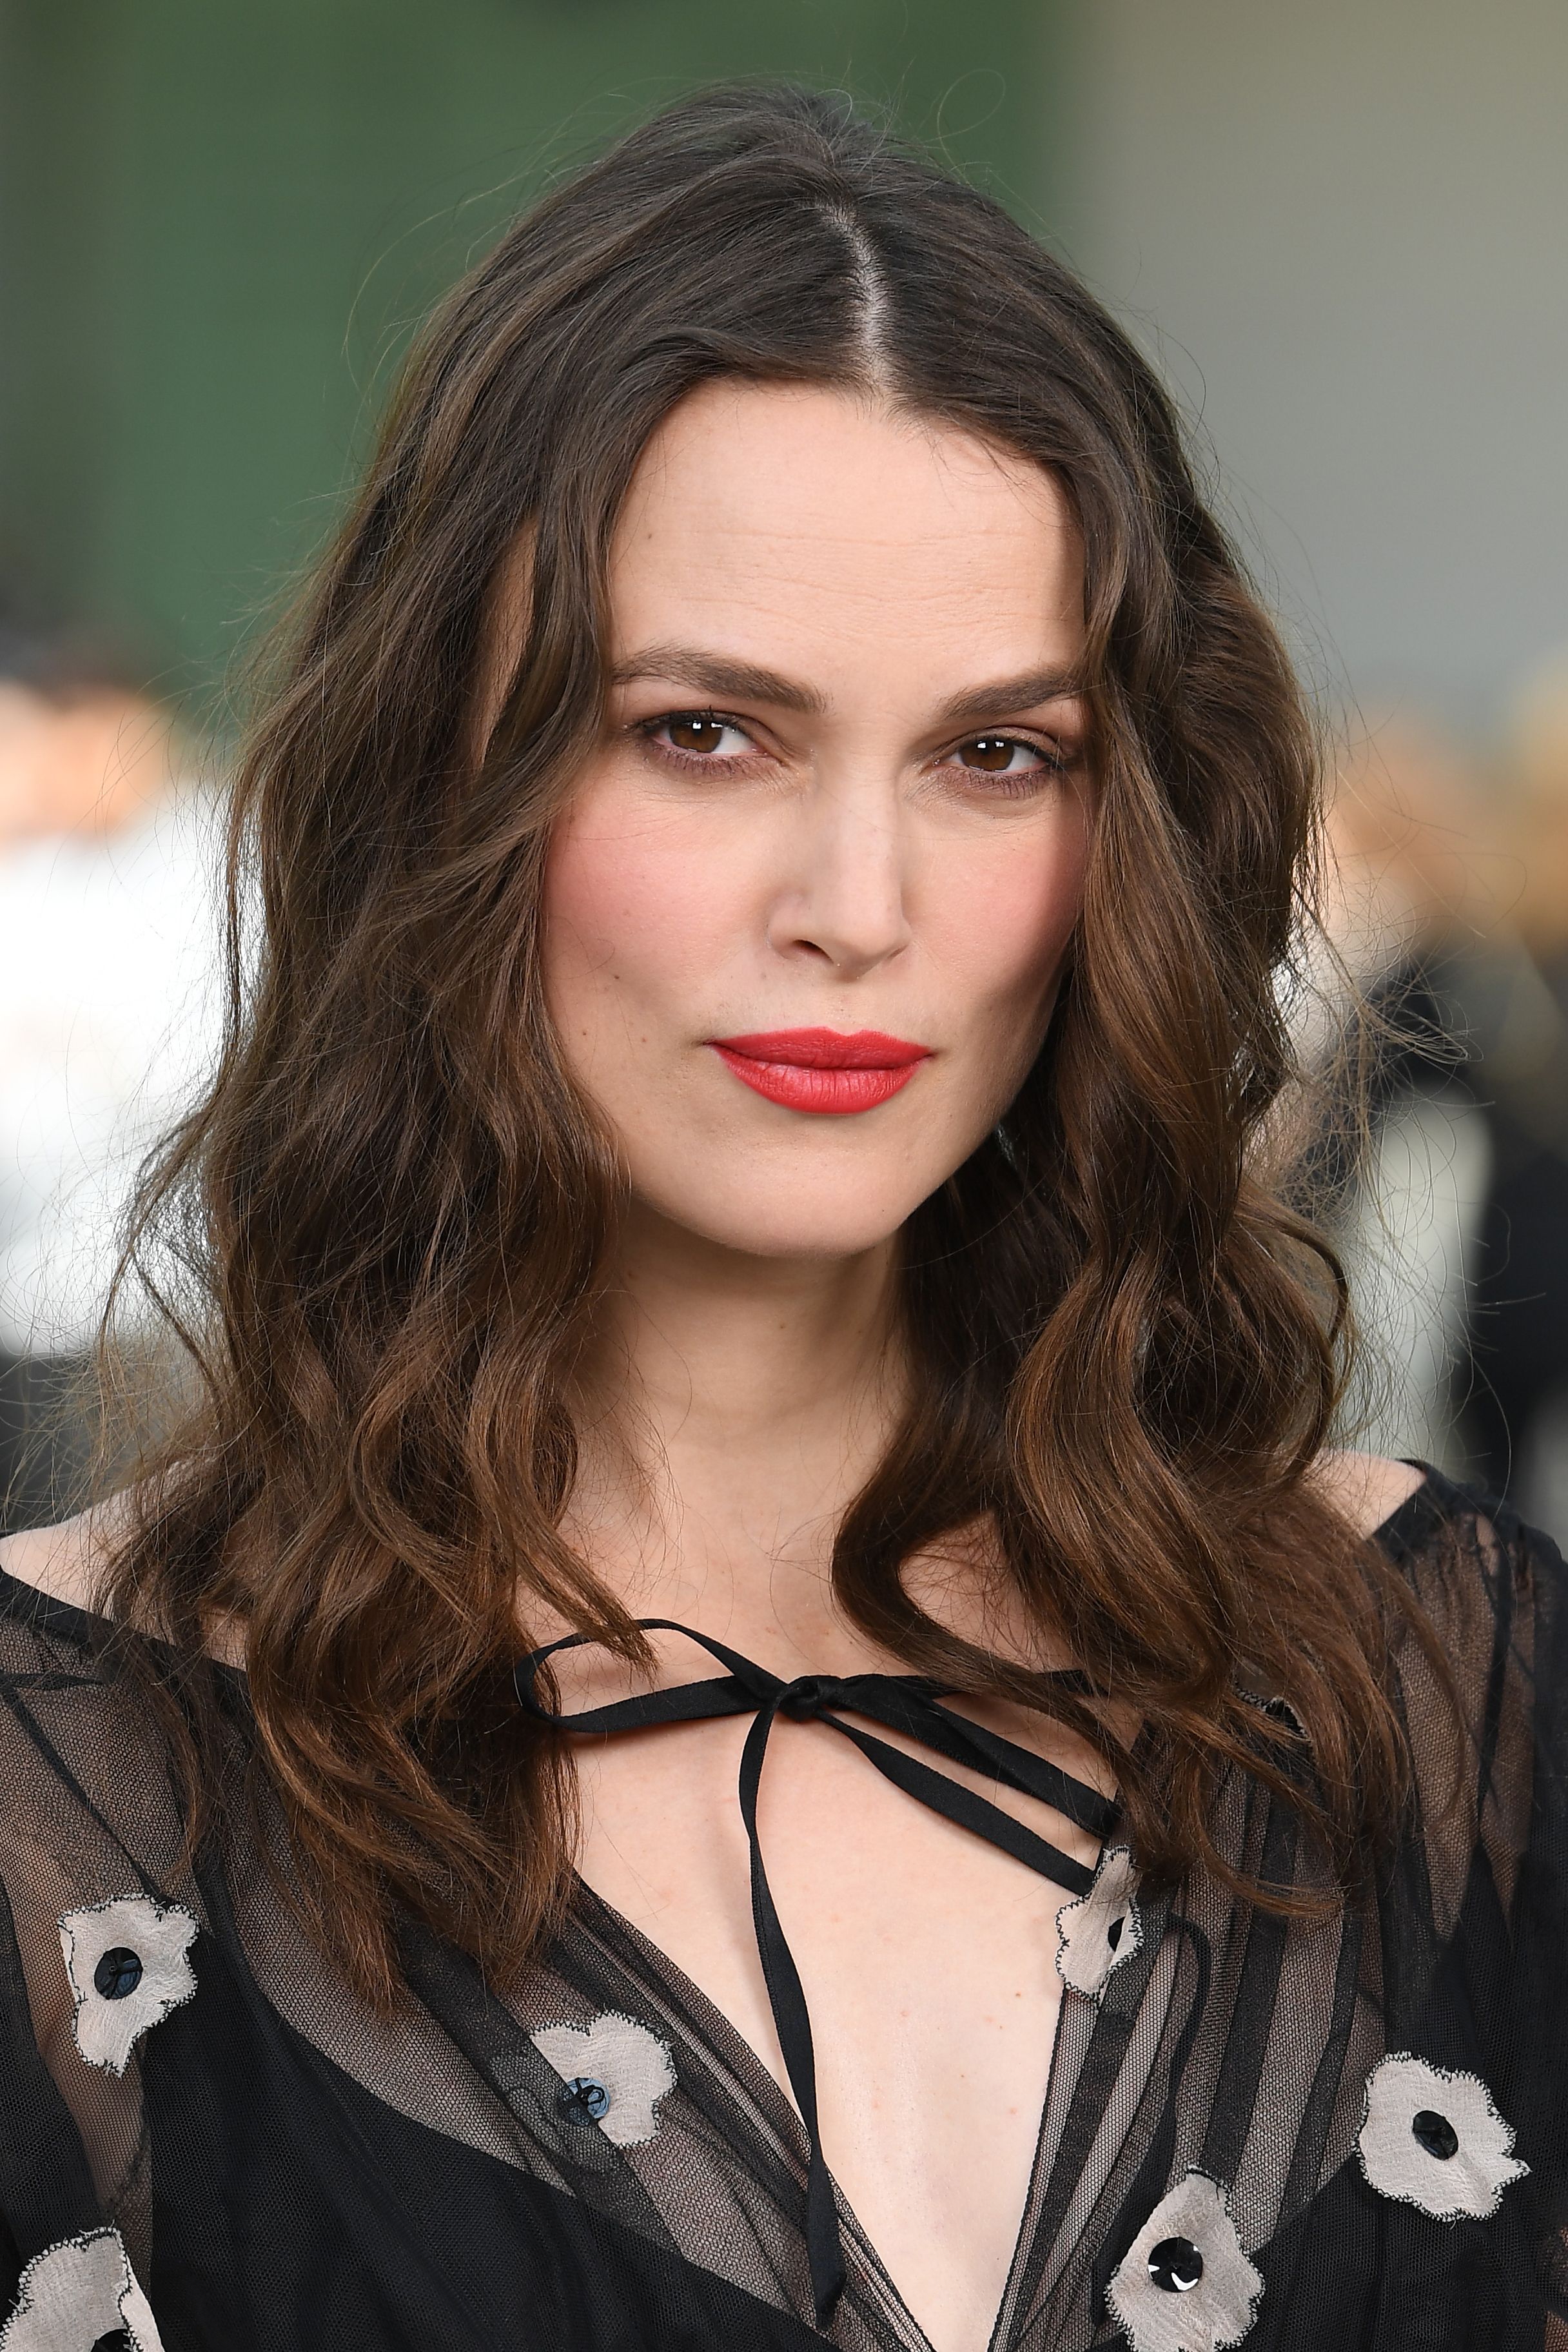 Keira Knightley at the Chanel Cruise 2020 Collection in 2019 in Paris, France | Source: Getty Images